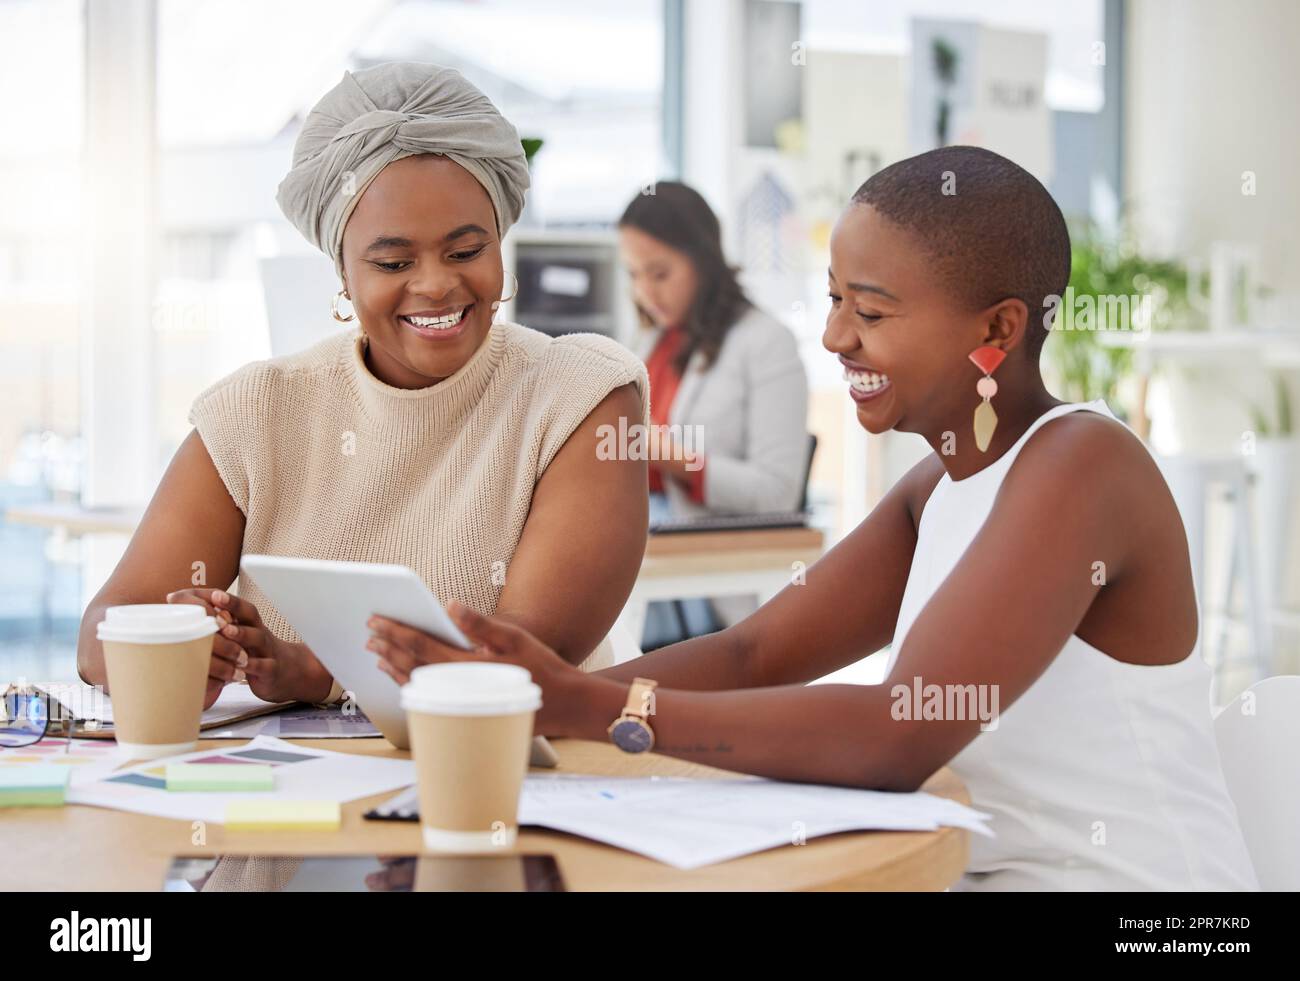 Smiling african american business women sitting together and using a digital tablet during a brainstorm meeting in the office. Confident happy black professionals planning a strategy with technology Stock Photo